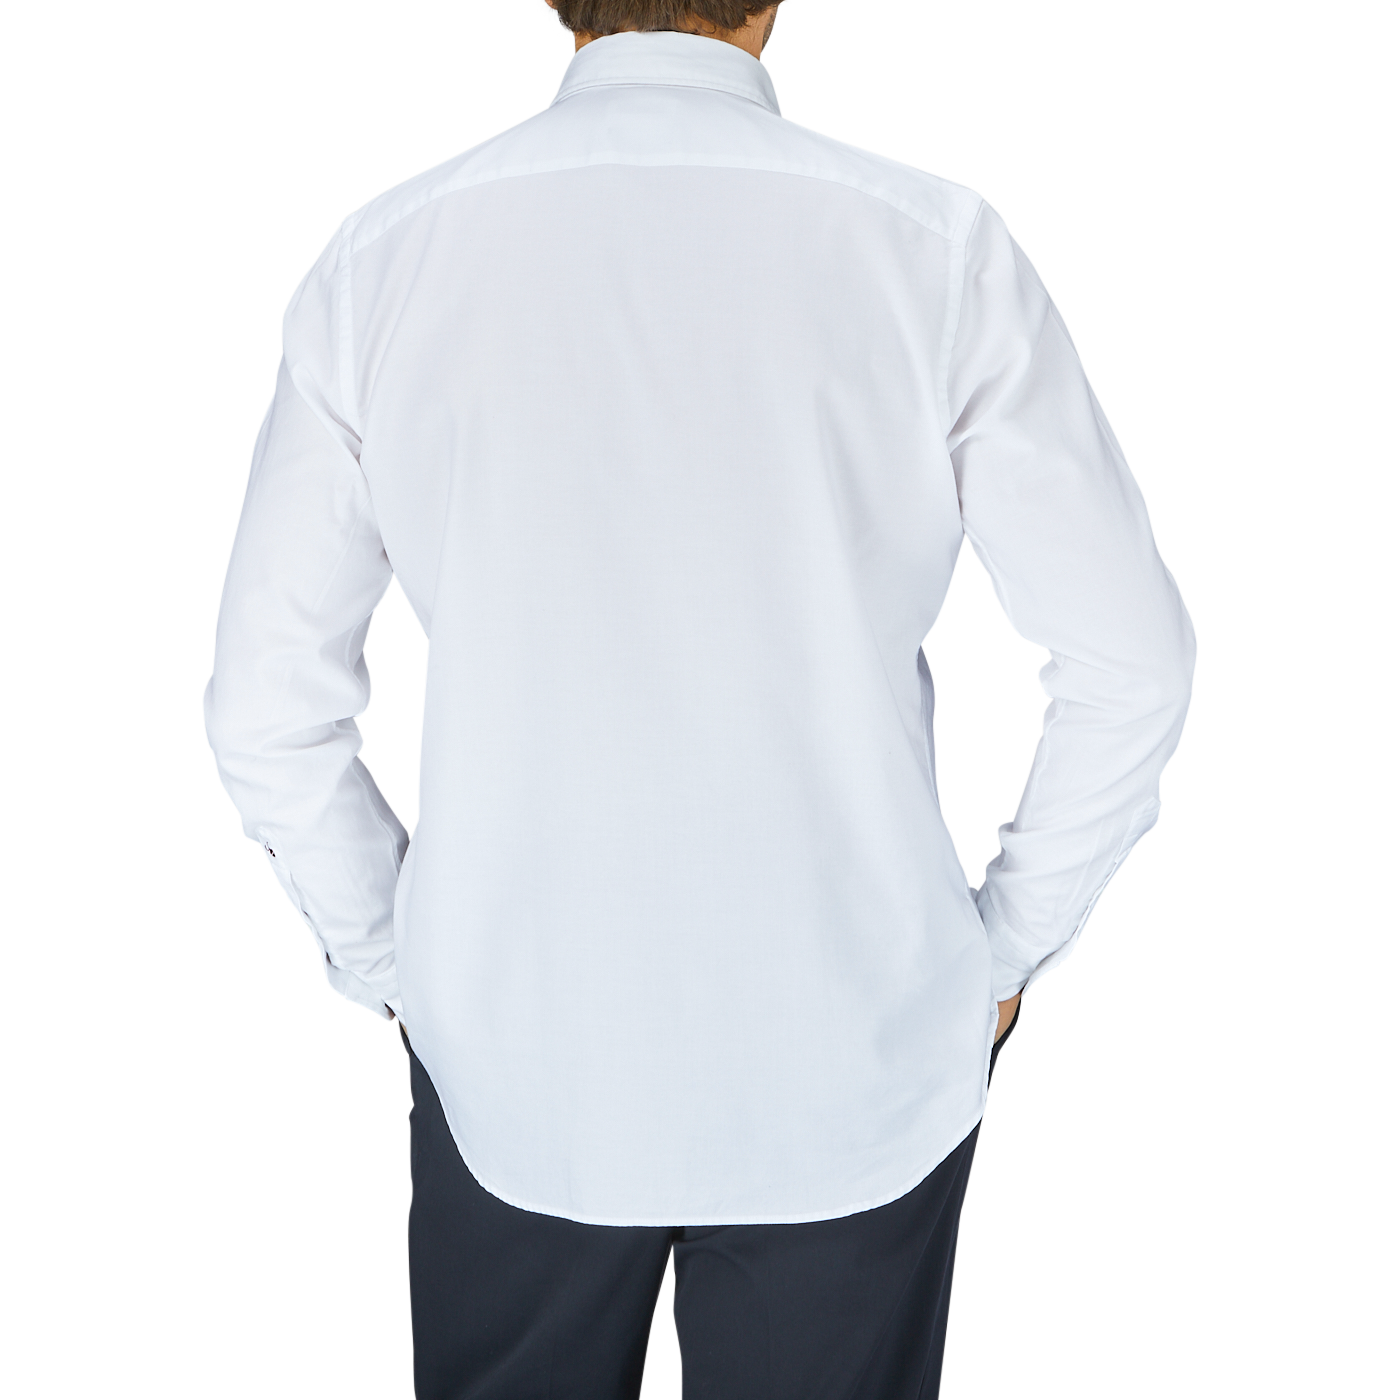 A person standing with their back to the camera, wearing a Glanshirt White Cotton Oxford Regular Shirt with mother-of-pearl buttons and black pants.